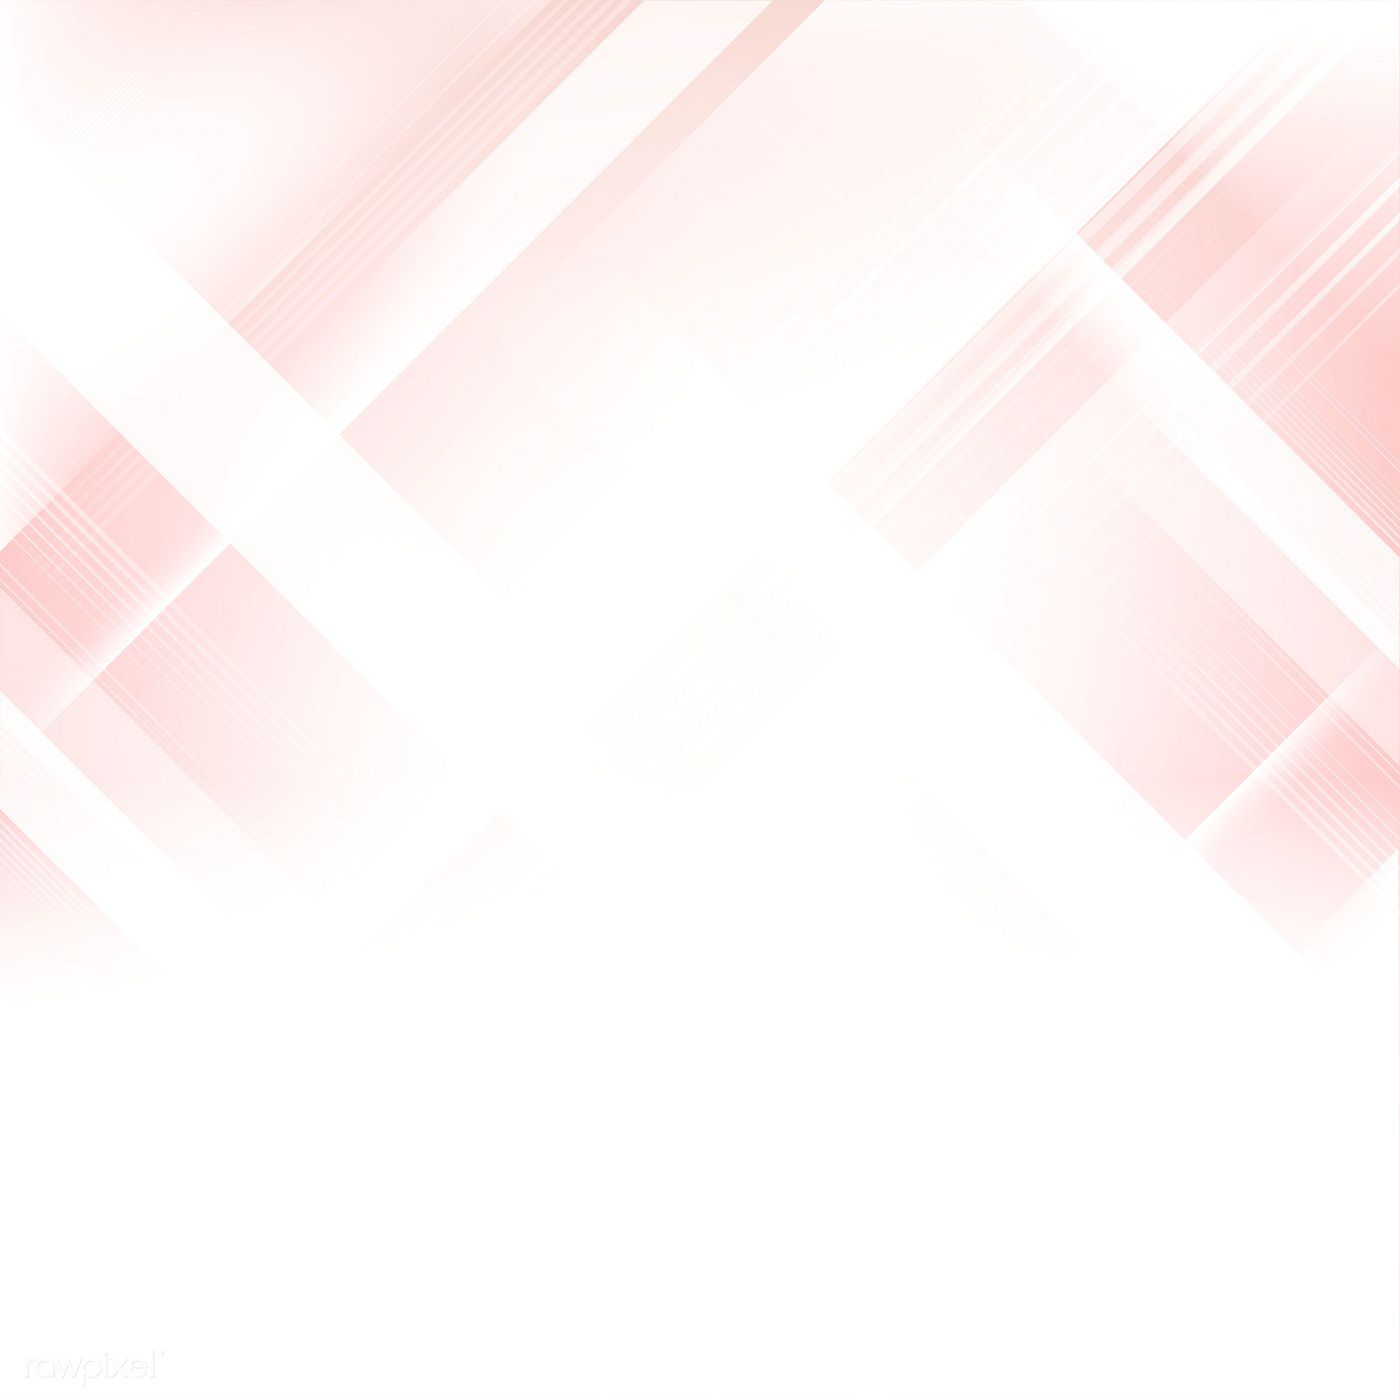 Red And White Abstract Background Hd